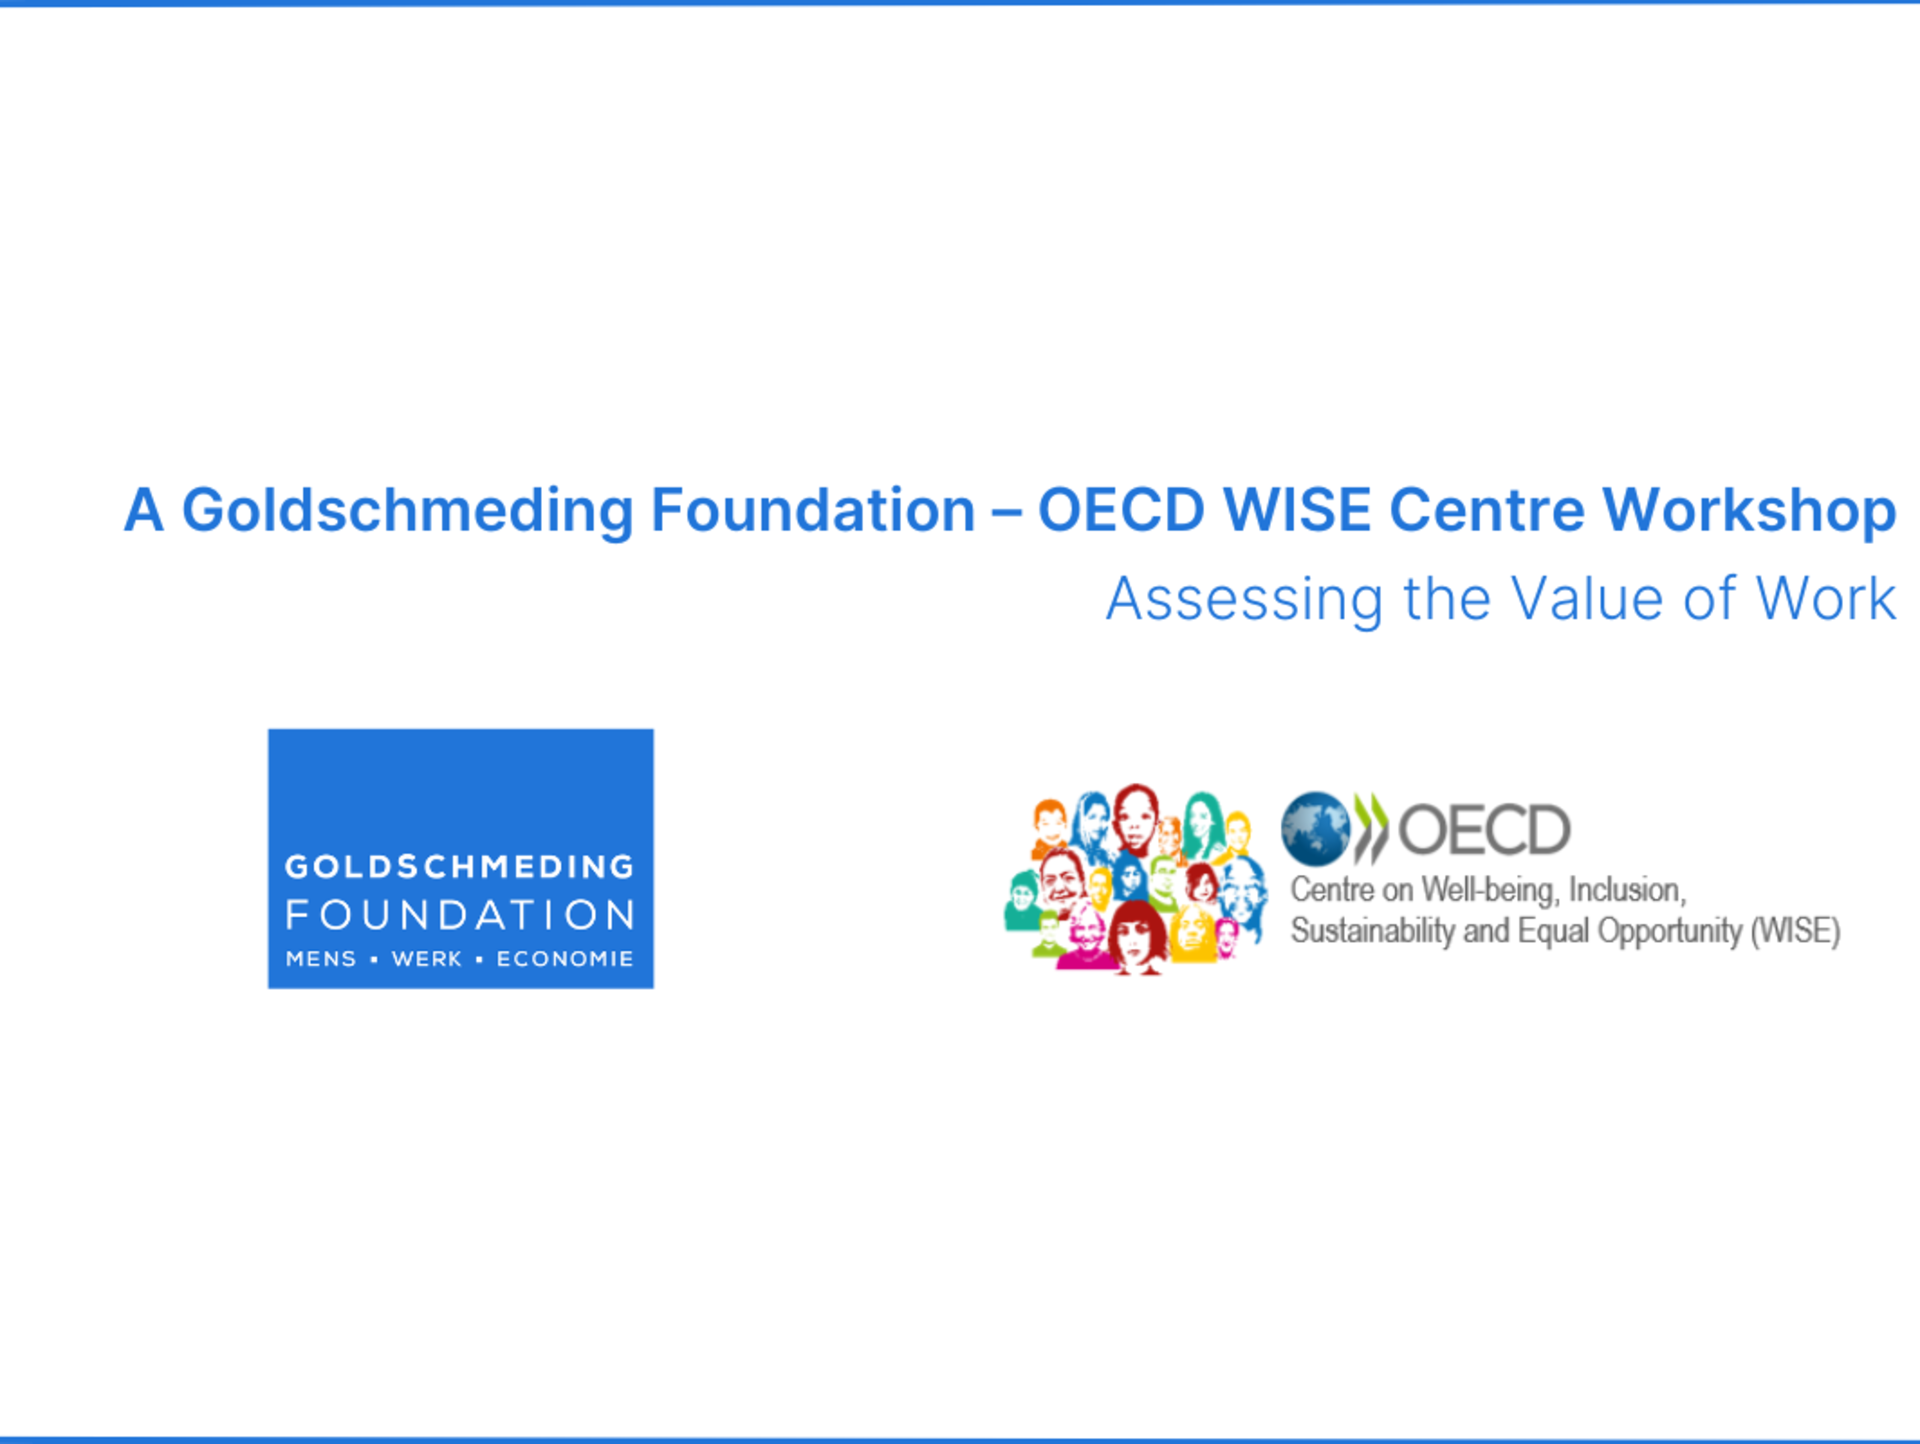 Assessing the Value of Work: A Goldschmeding Foundation - OECD WISE Centre Workshop